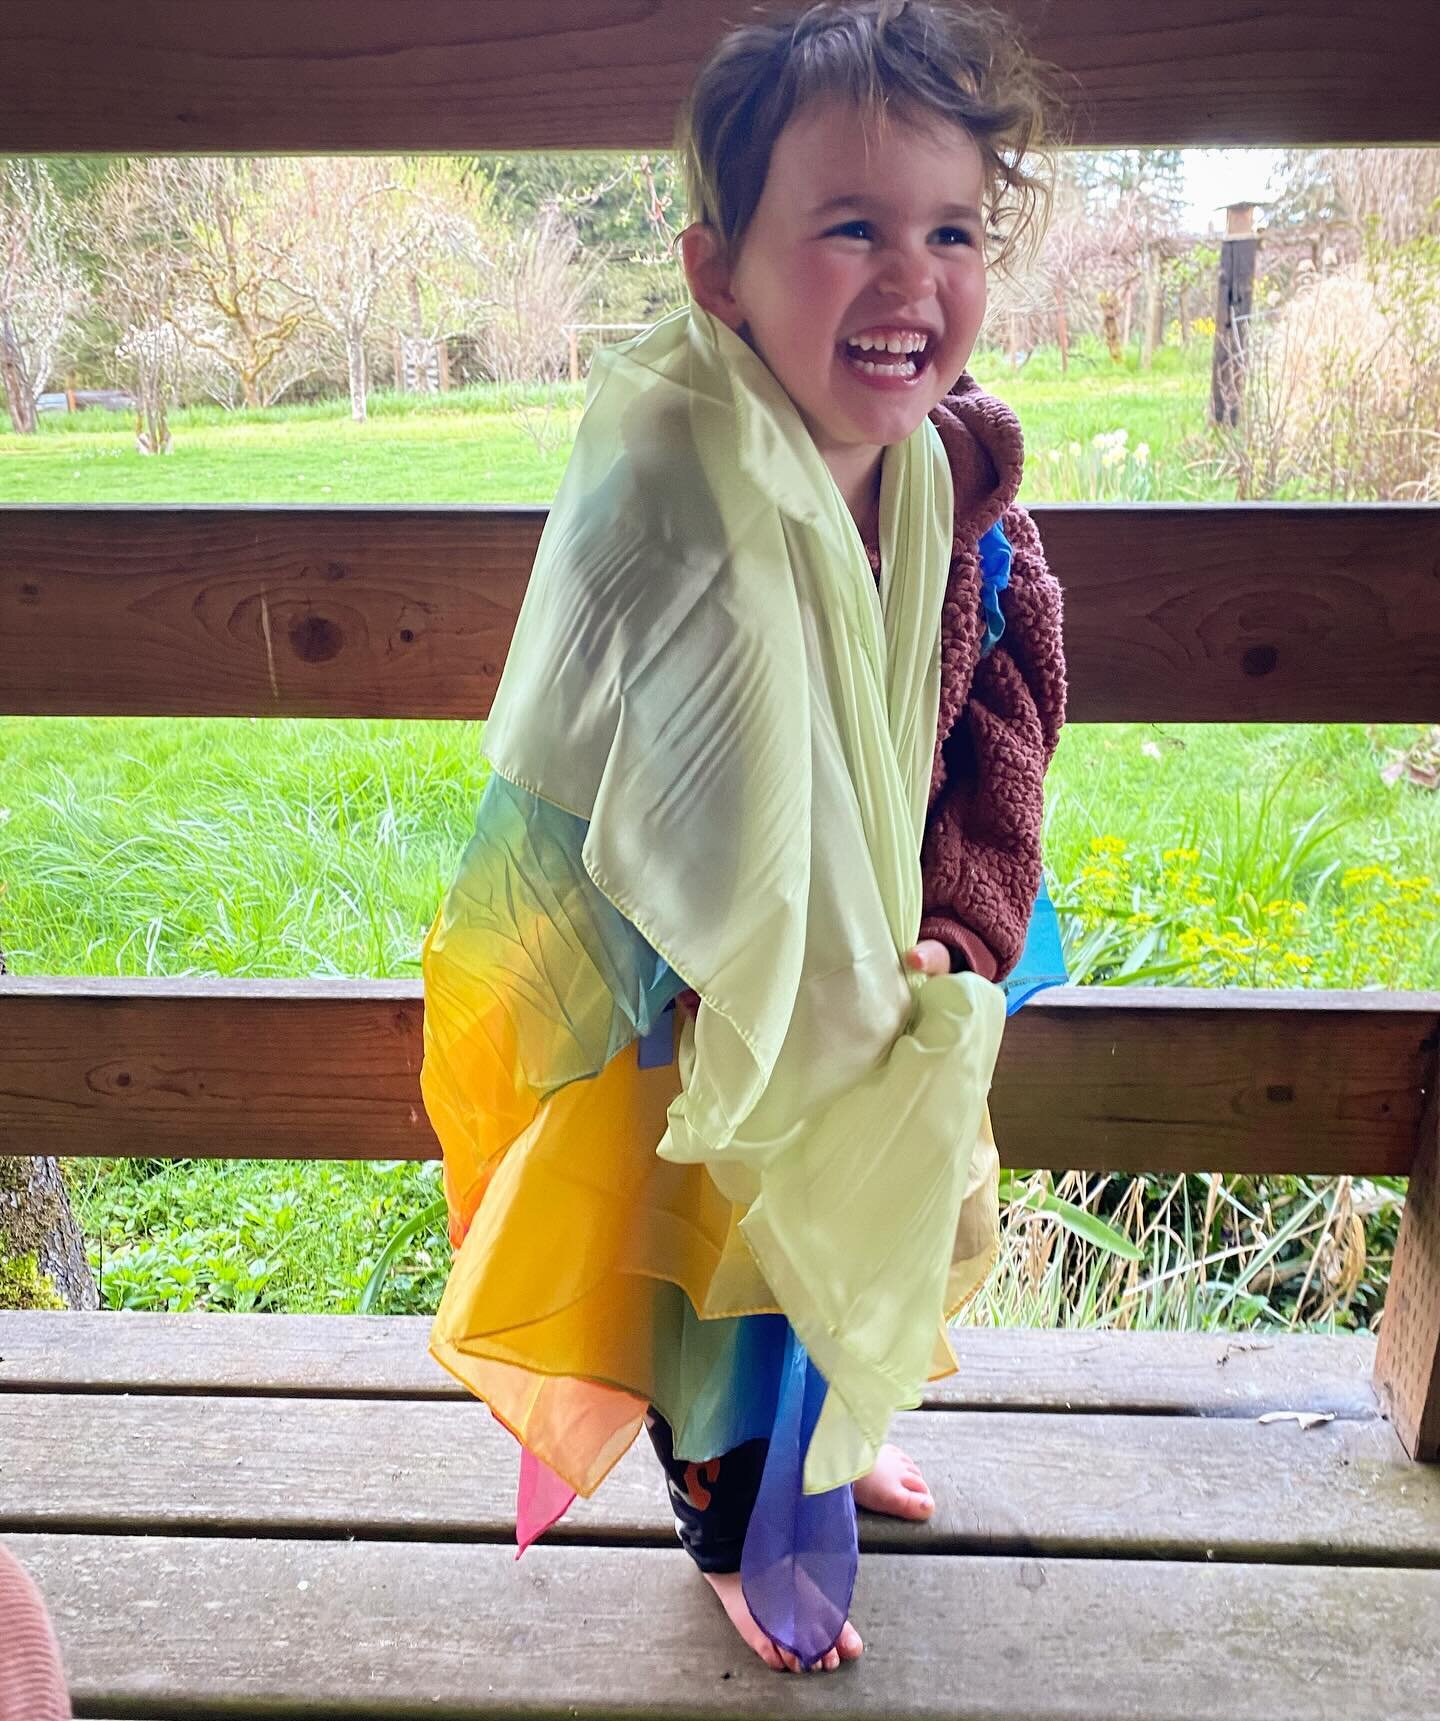 Guess who turned 3 today? This little Juniper. We had a lovely day including a purple angel food cake and a rainbow skirt and wings! 🌈